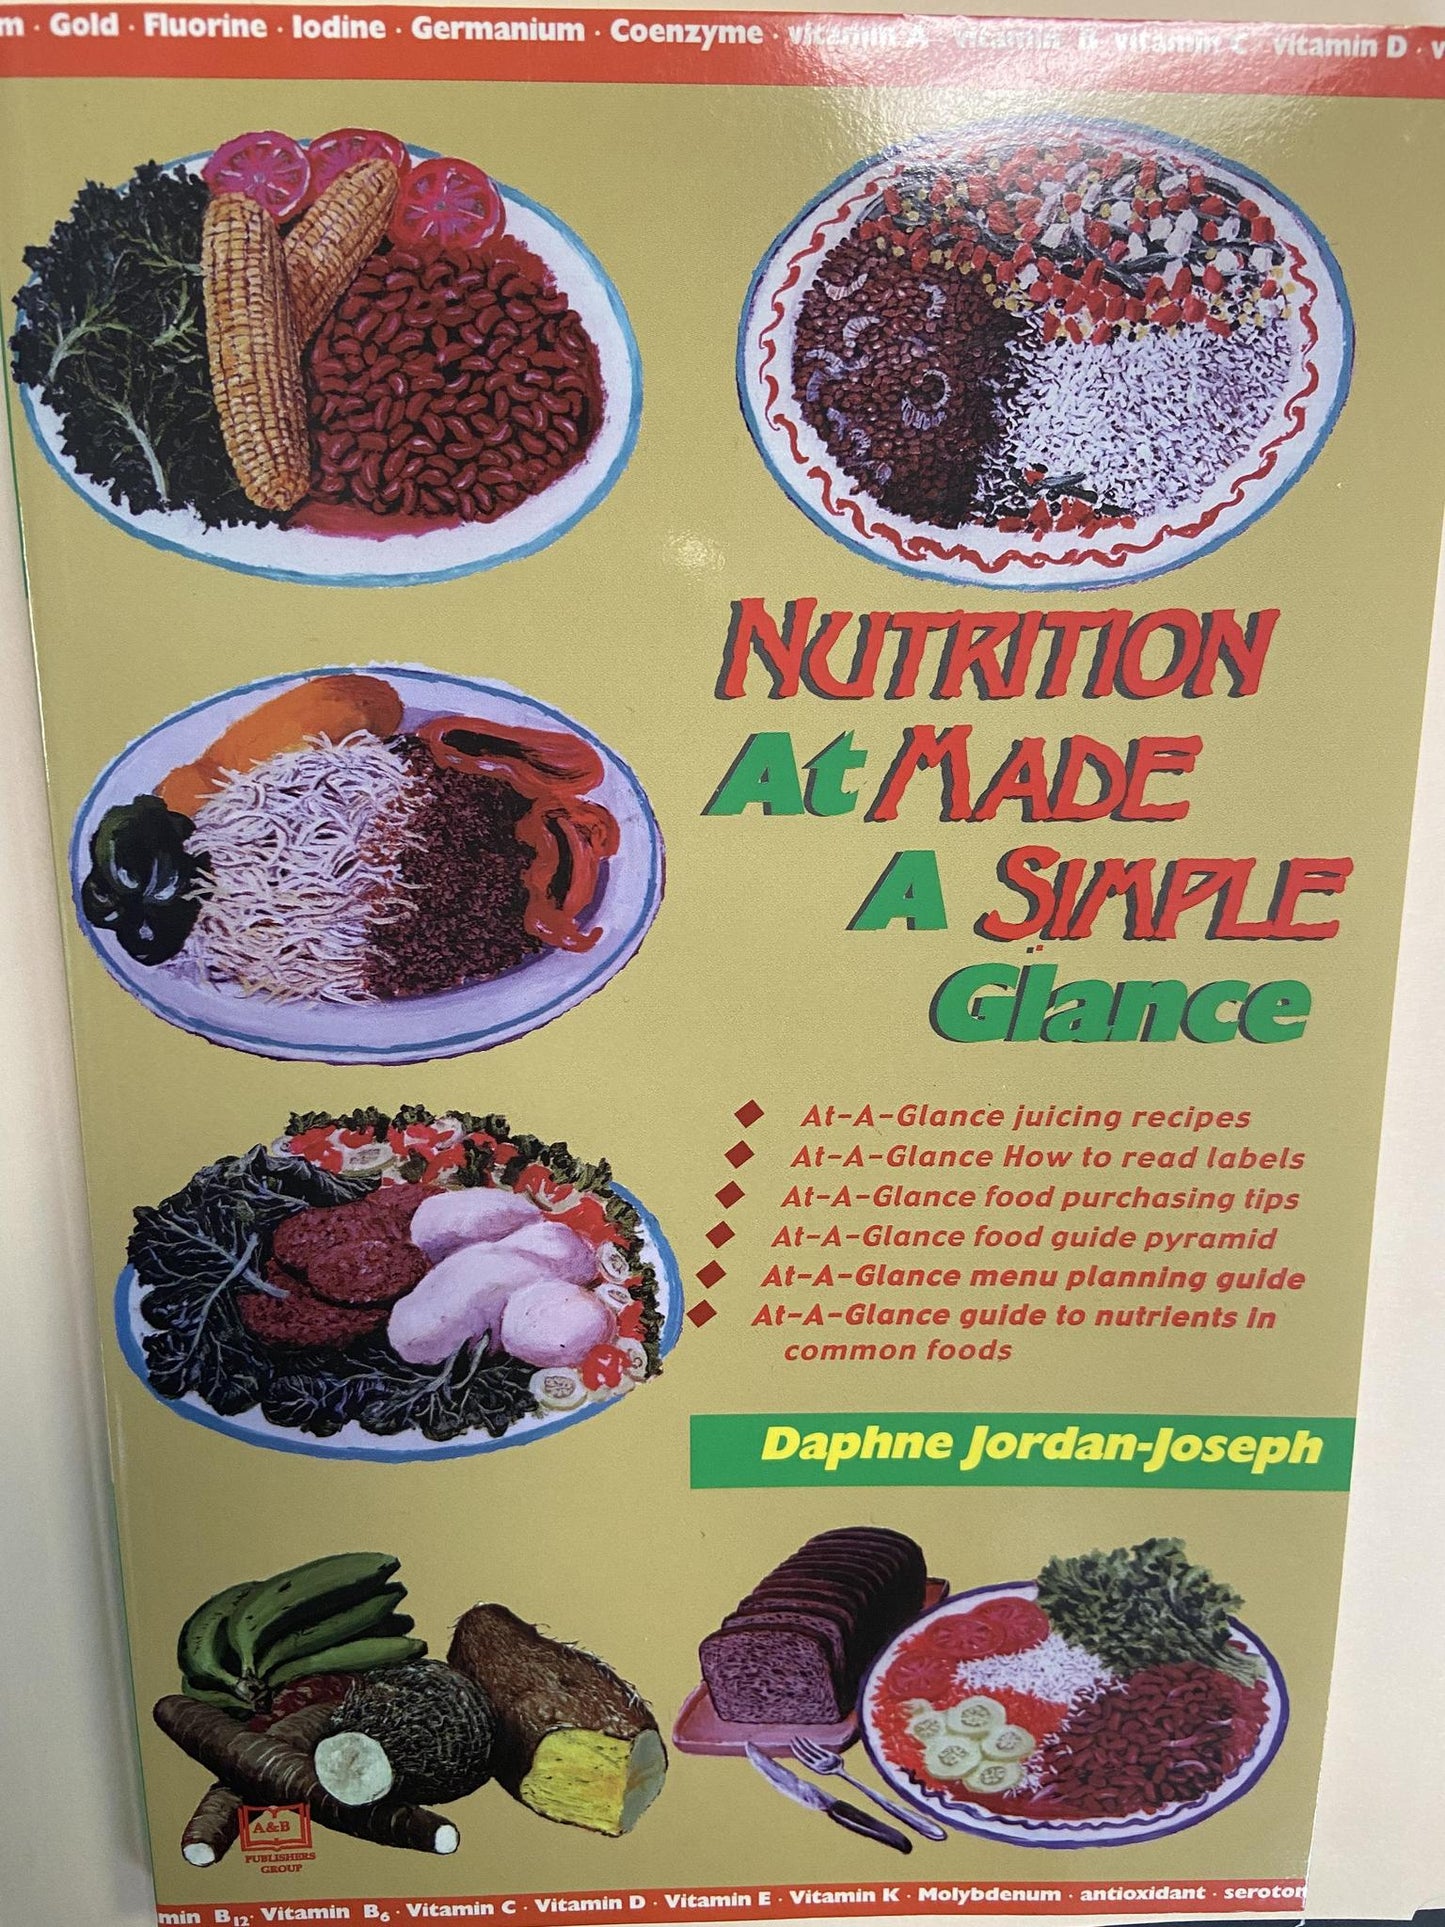 "Nutrition Made Simple: At a Glance" by Daphne Jordan-Joseph